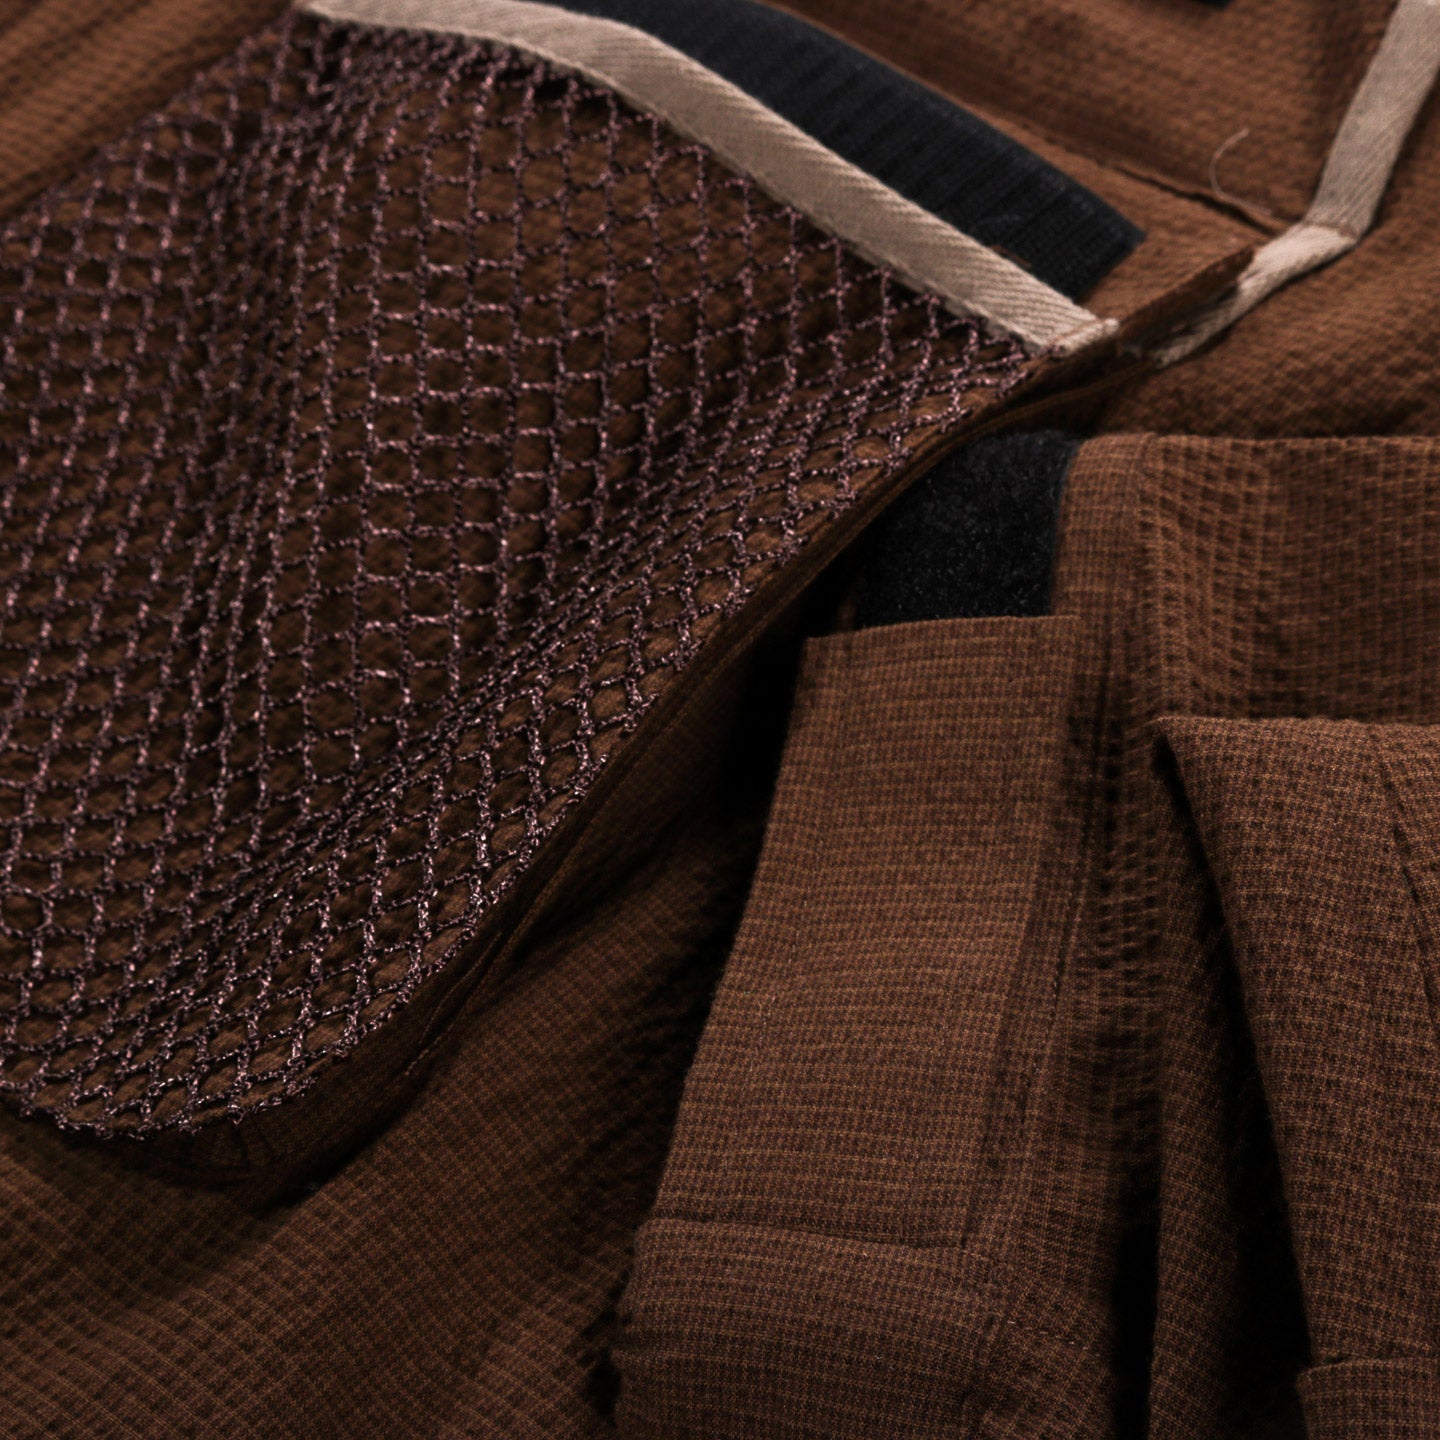 S.K. MANOR HILL WADING JACKET BROWN PUCKERED COTTON